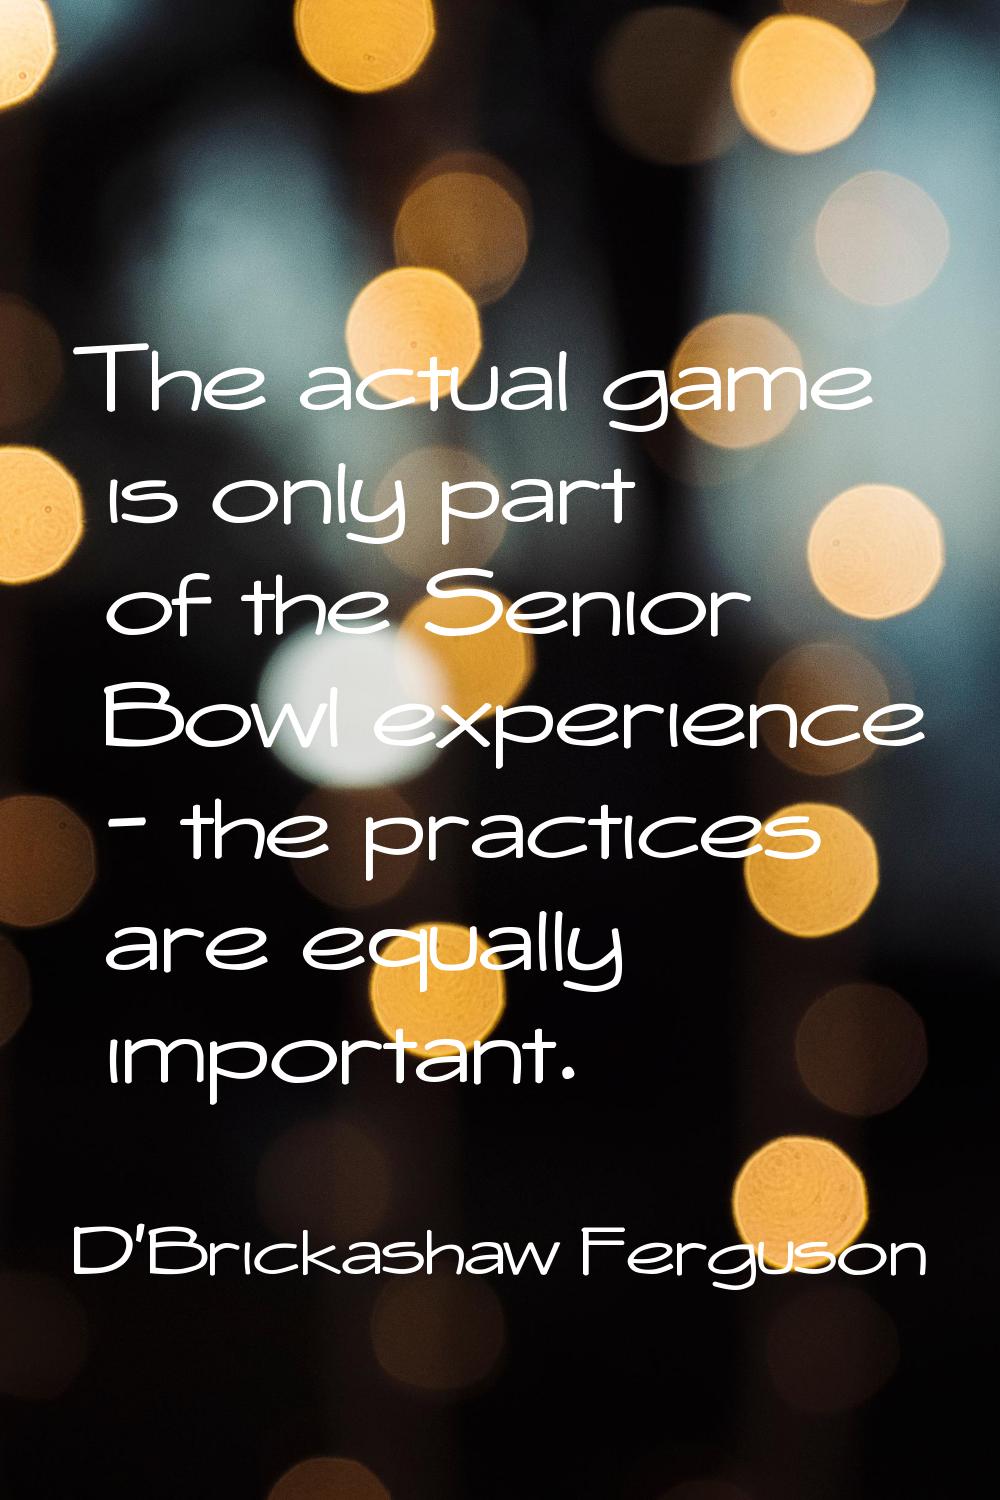 The actual game is only part of the Senior Bowl experience - the practices are equally important.